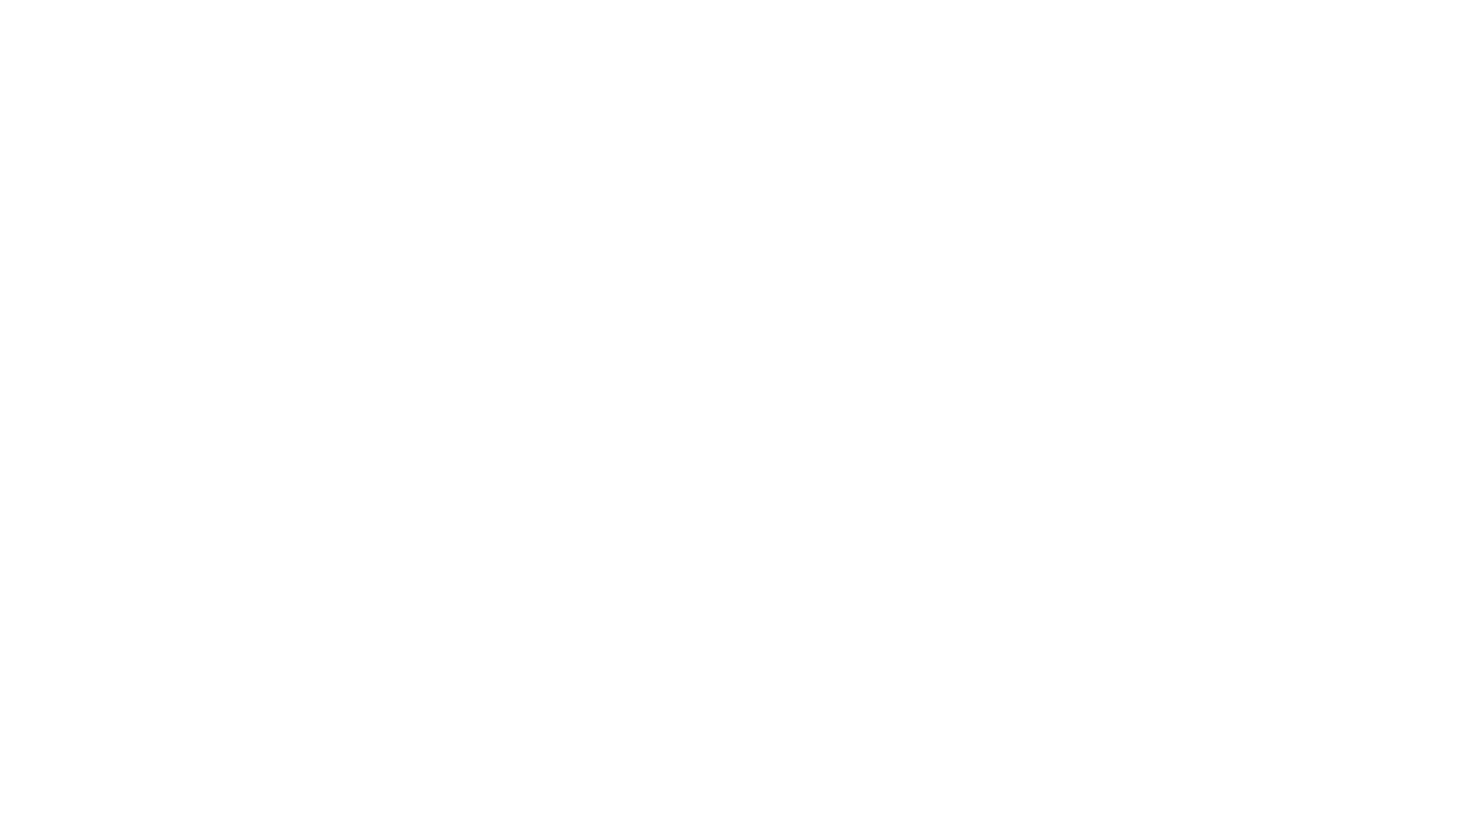 SNS SHOWS A NEW WORLD